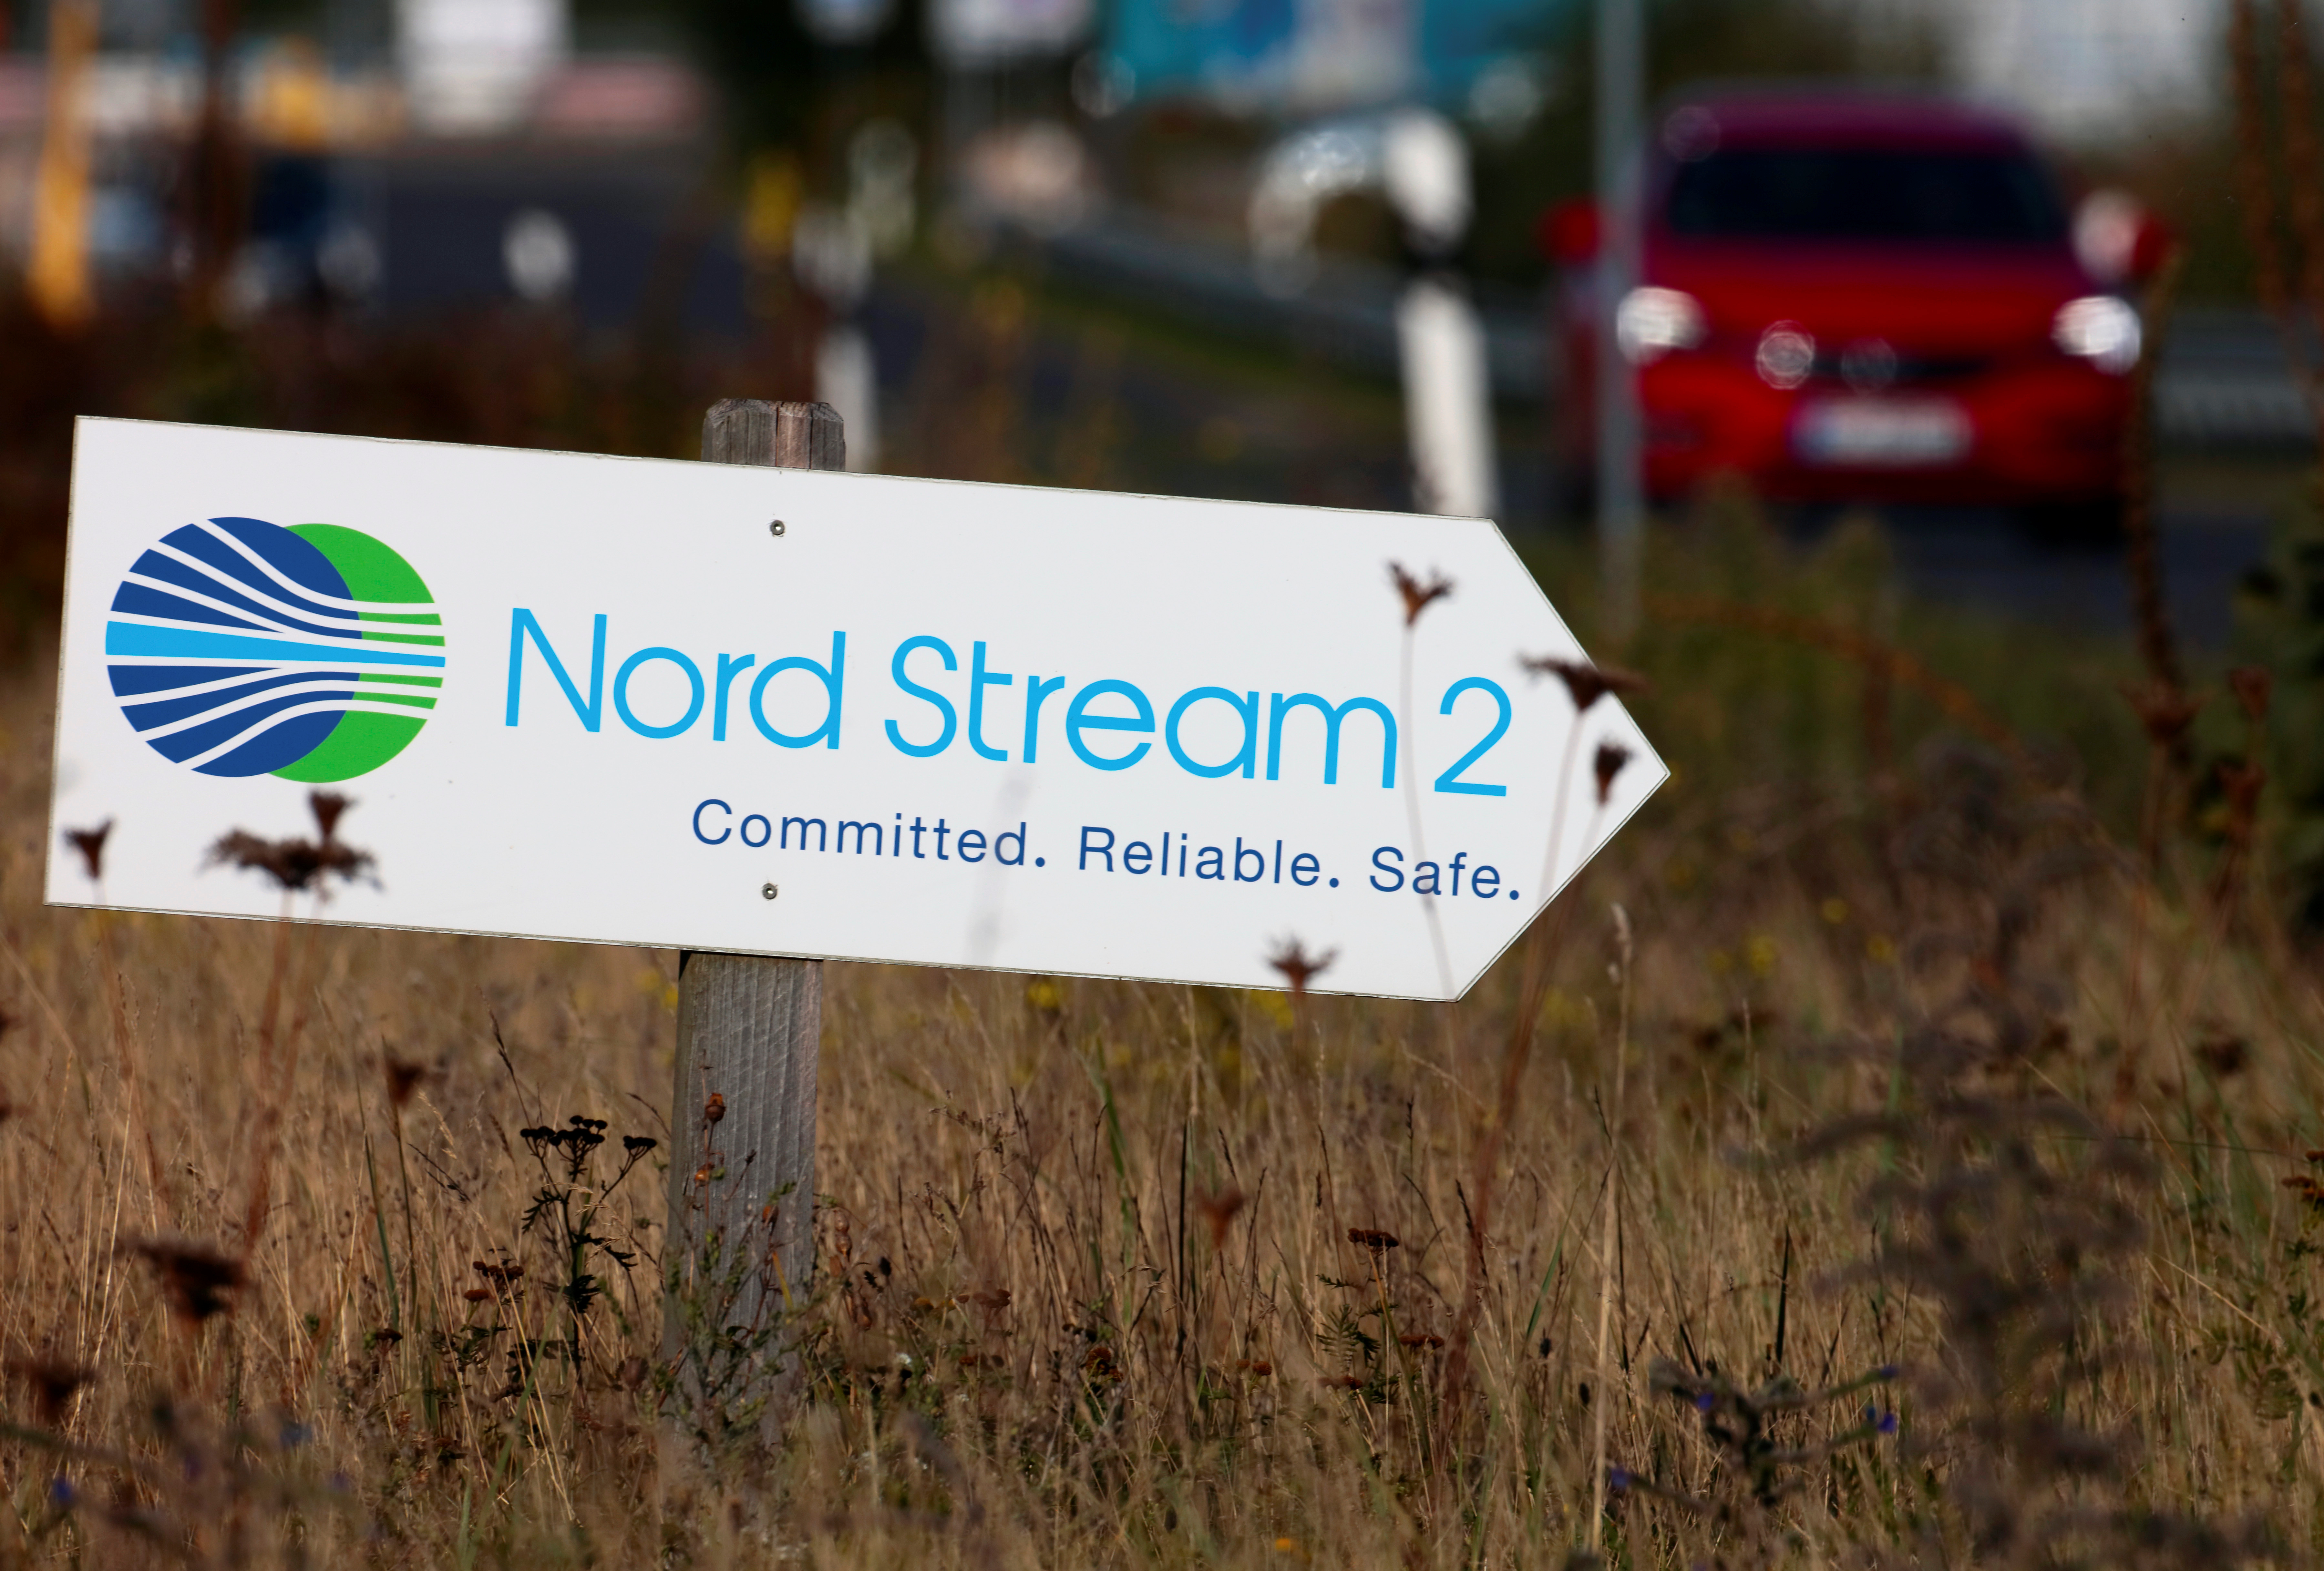 A road sign directs traffic towards the Nord Stream 2 gas line landfall facility entrance in Lubmin, Germany, September 10, 2020.   REUTERS/Hannibal Hanschke